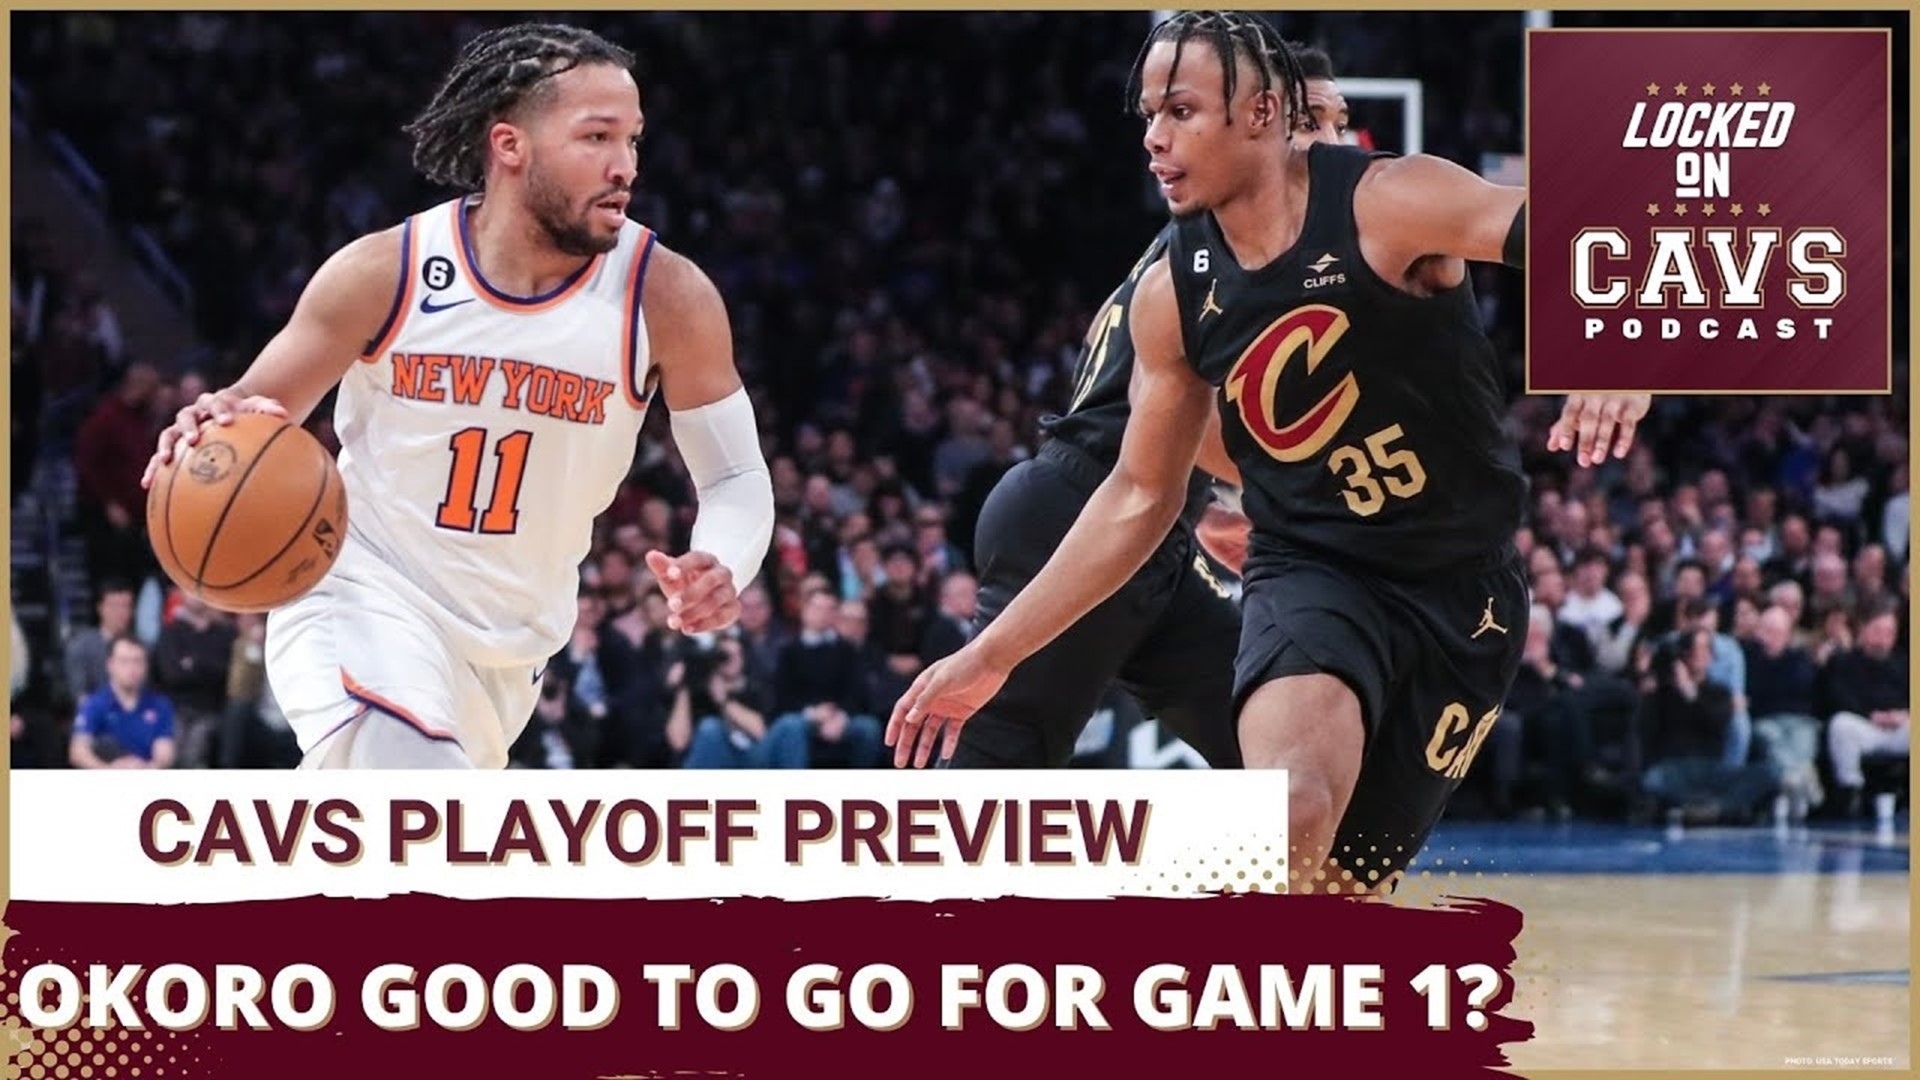 Chris and Evan talk about the latest on Isaac Okoro’s health, if Julius Randle will play, who the Cavs’ second most important player in the series is and more.